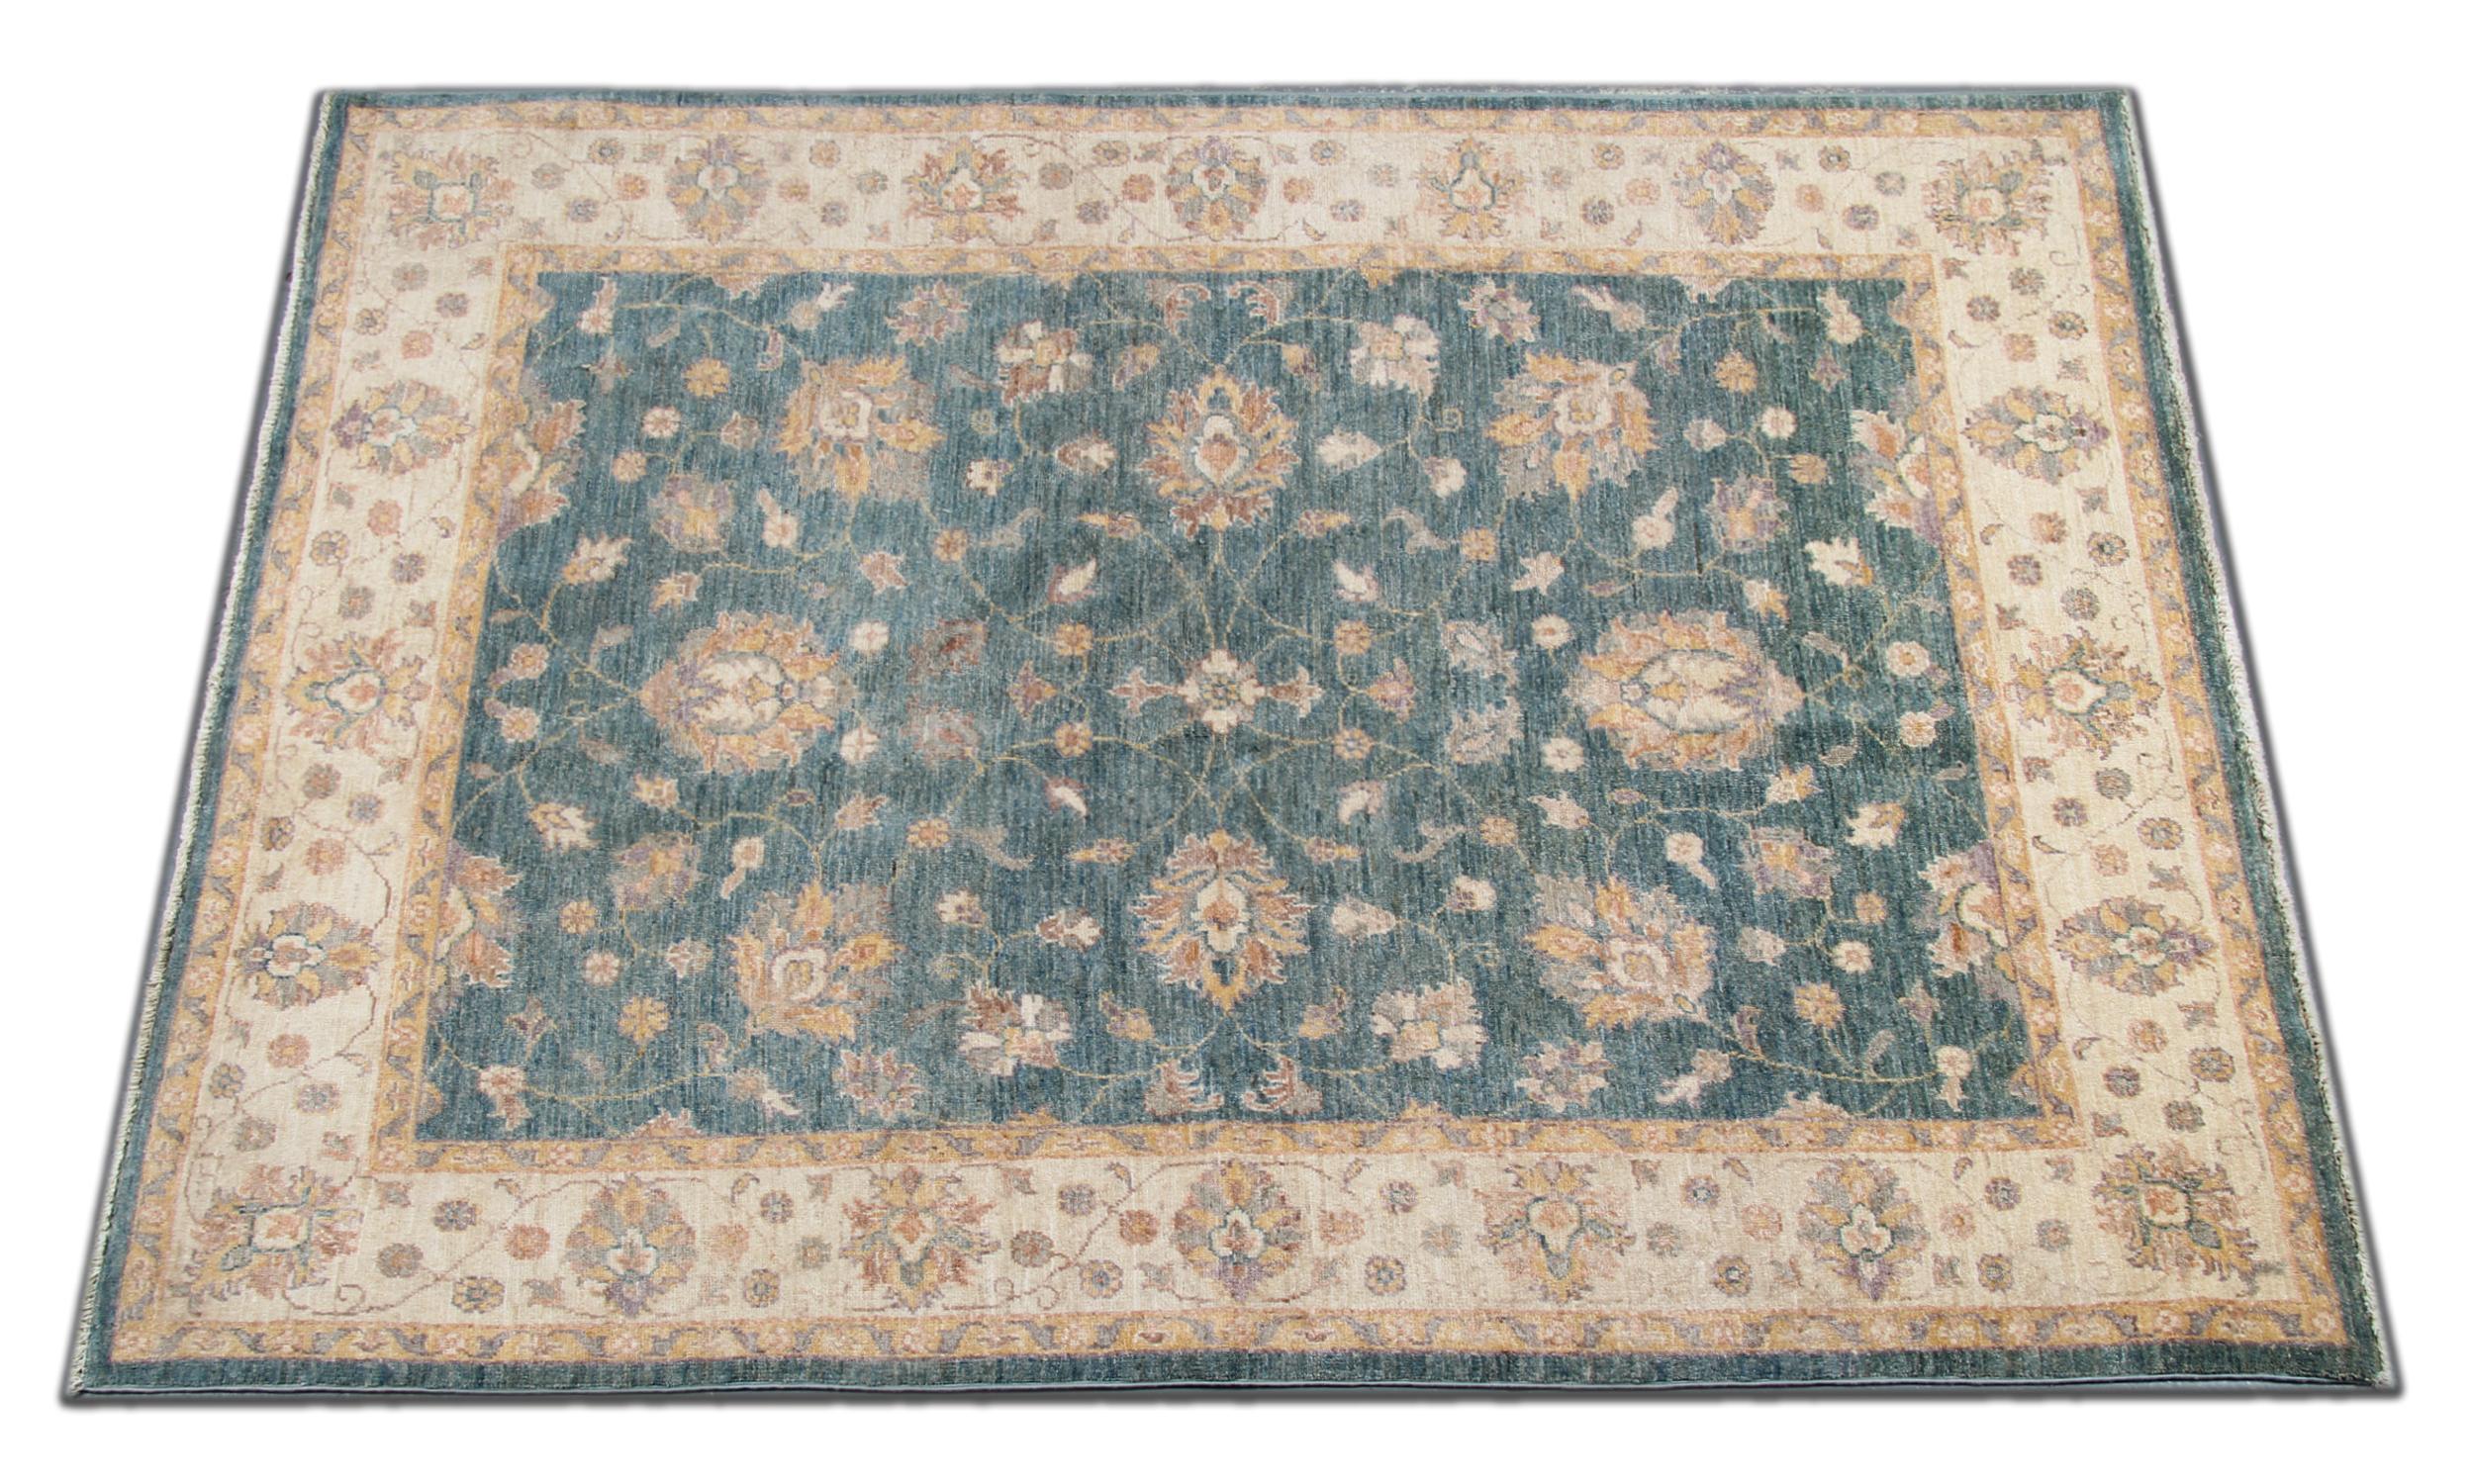 This modern Ziegler Style rug has a traditional Saltanabad design. Woven on a loom in Afghanistan by master weavers. Woven with the finest materials, hand-spun wool has been used, dyed using traditional organic vegetable dying techniques. The design